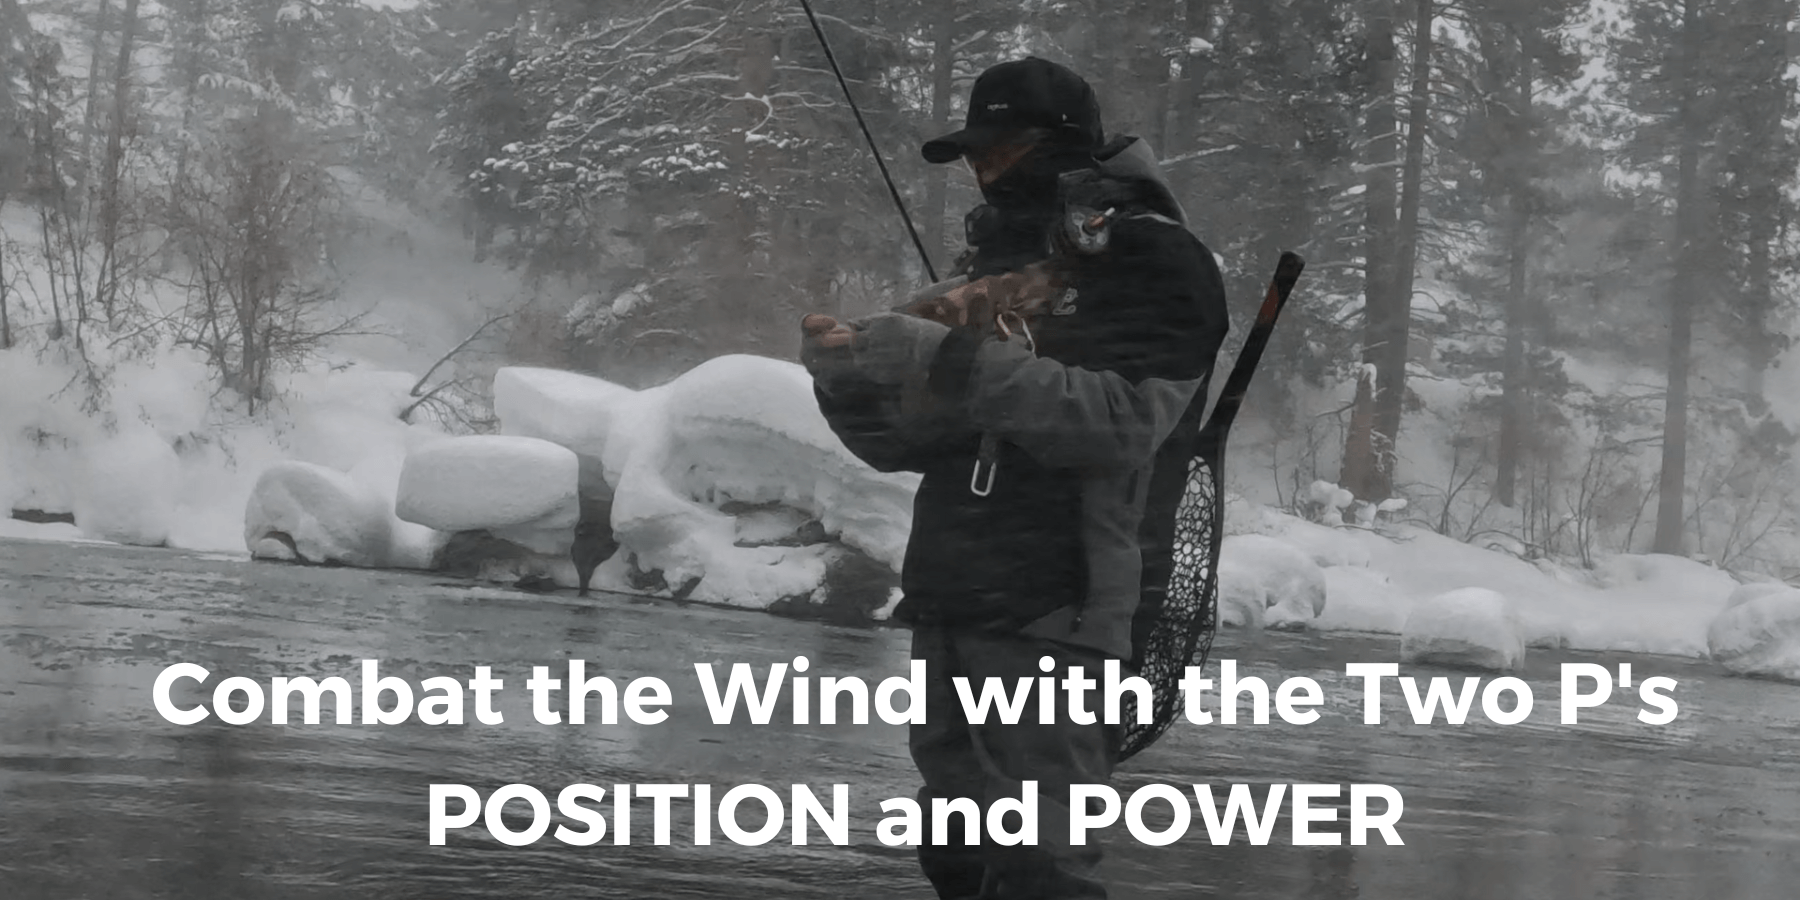 Combat the Wind with the Two P's - POSITION and POWER